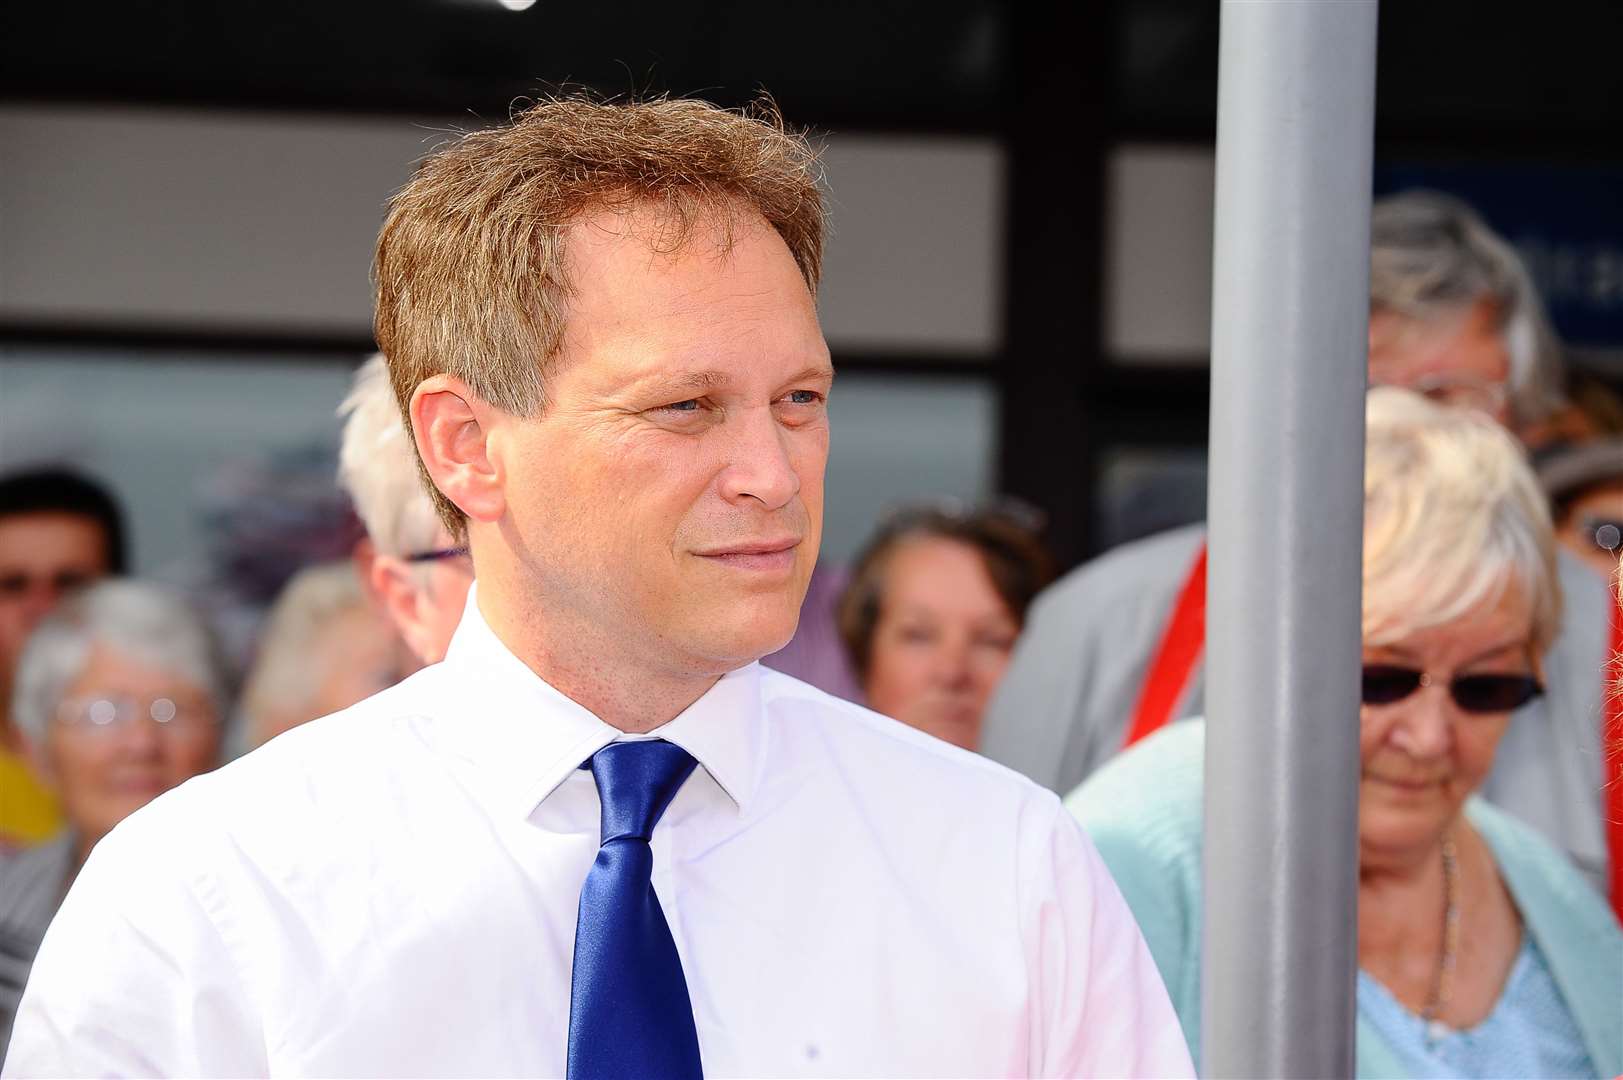 Grant Shapps addresses the crowd during a visit to Manston Airport. Picture: Alan Langley